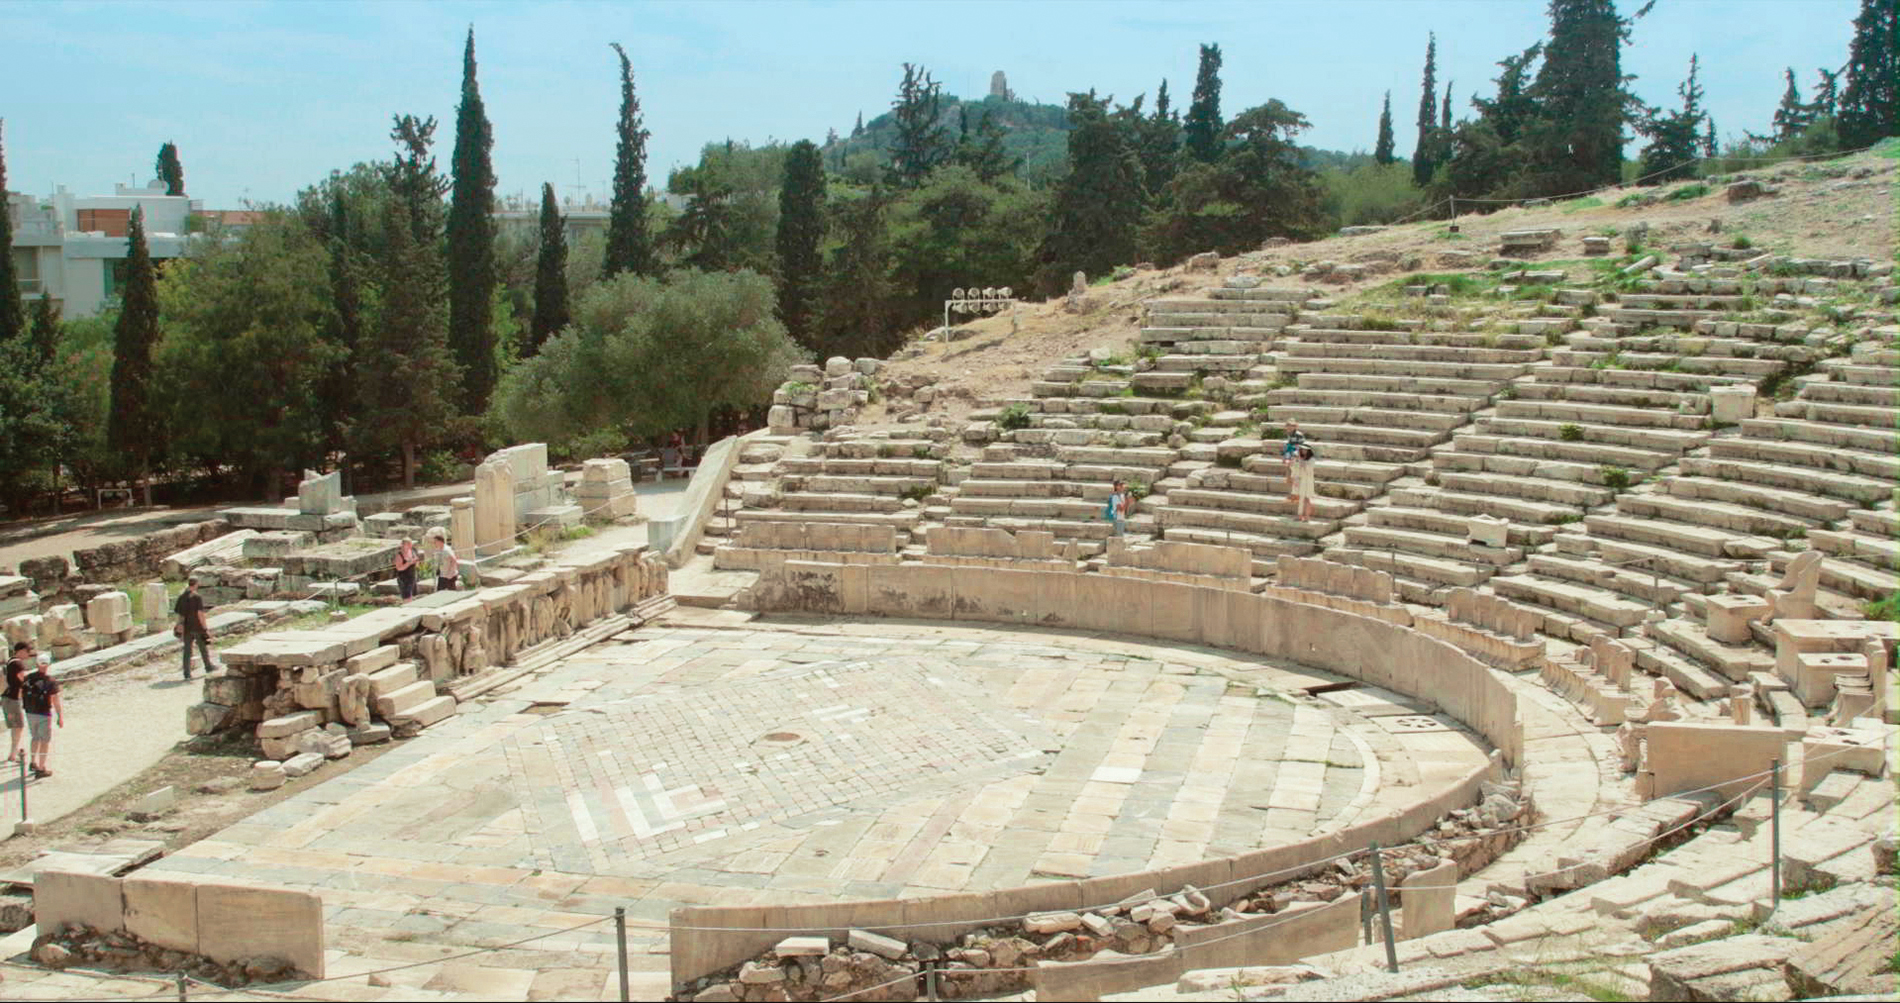 The film What Is Democracy?  includes scenes from  Greece, where Plato wrestled with the concept